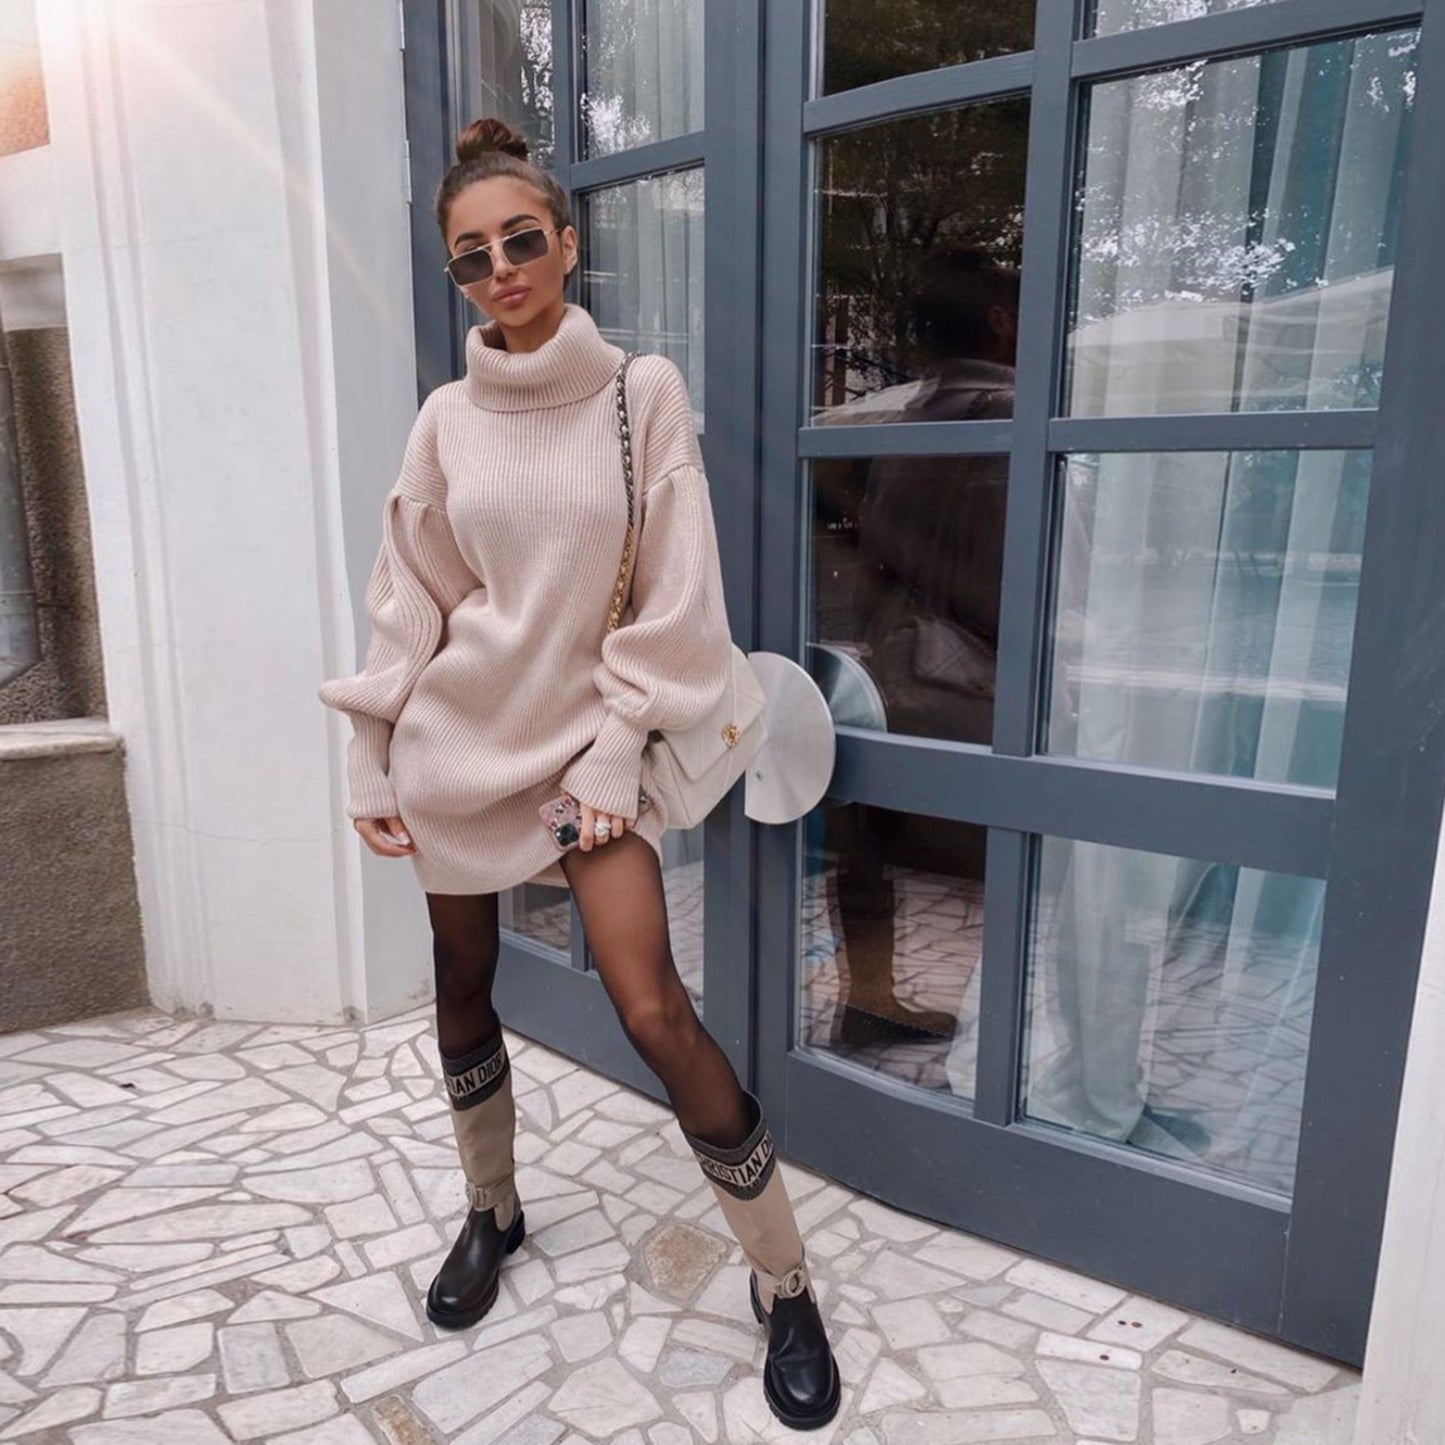 Winter Outfits | Cotton Minimalist Oversized Turtleneck Sweater Dress Outfit